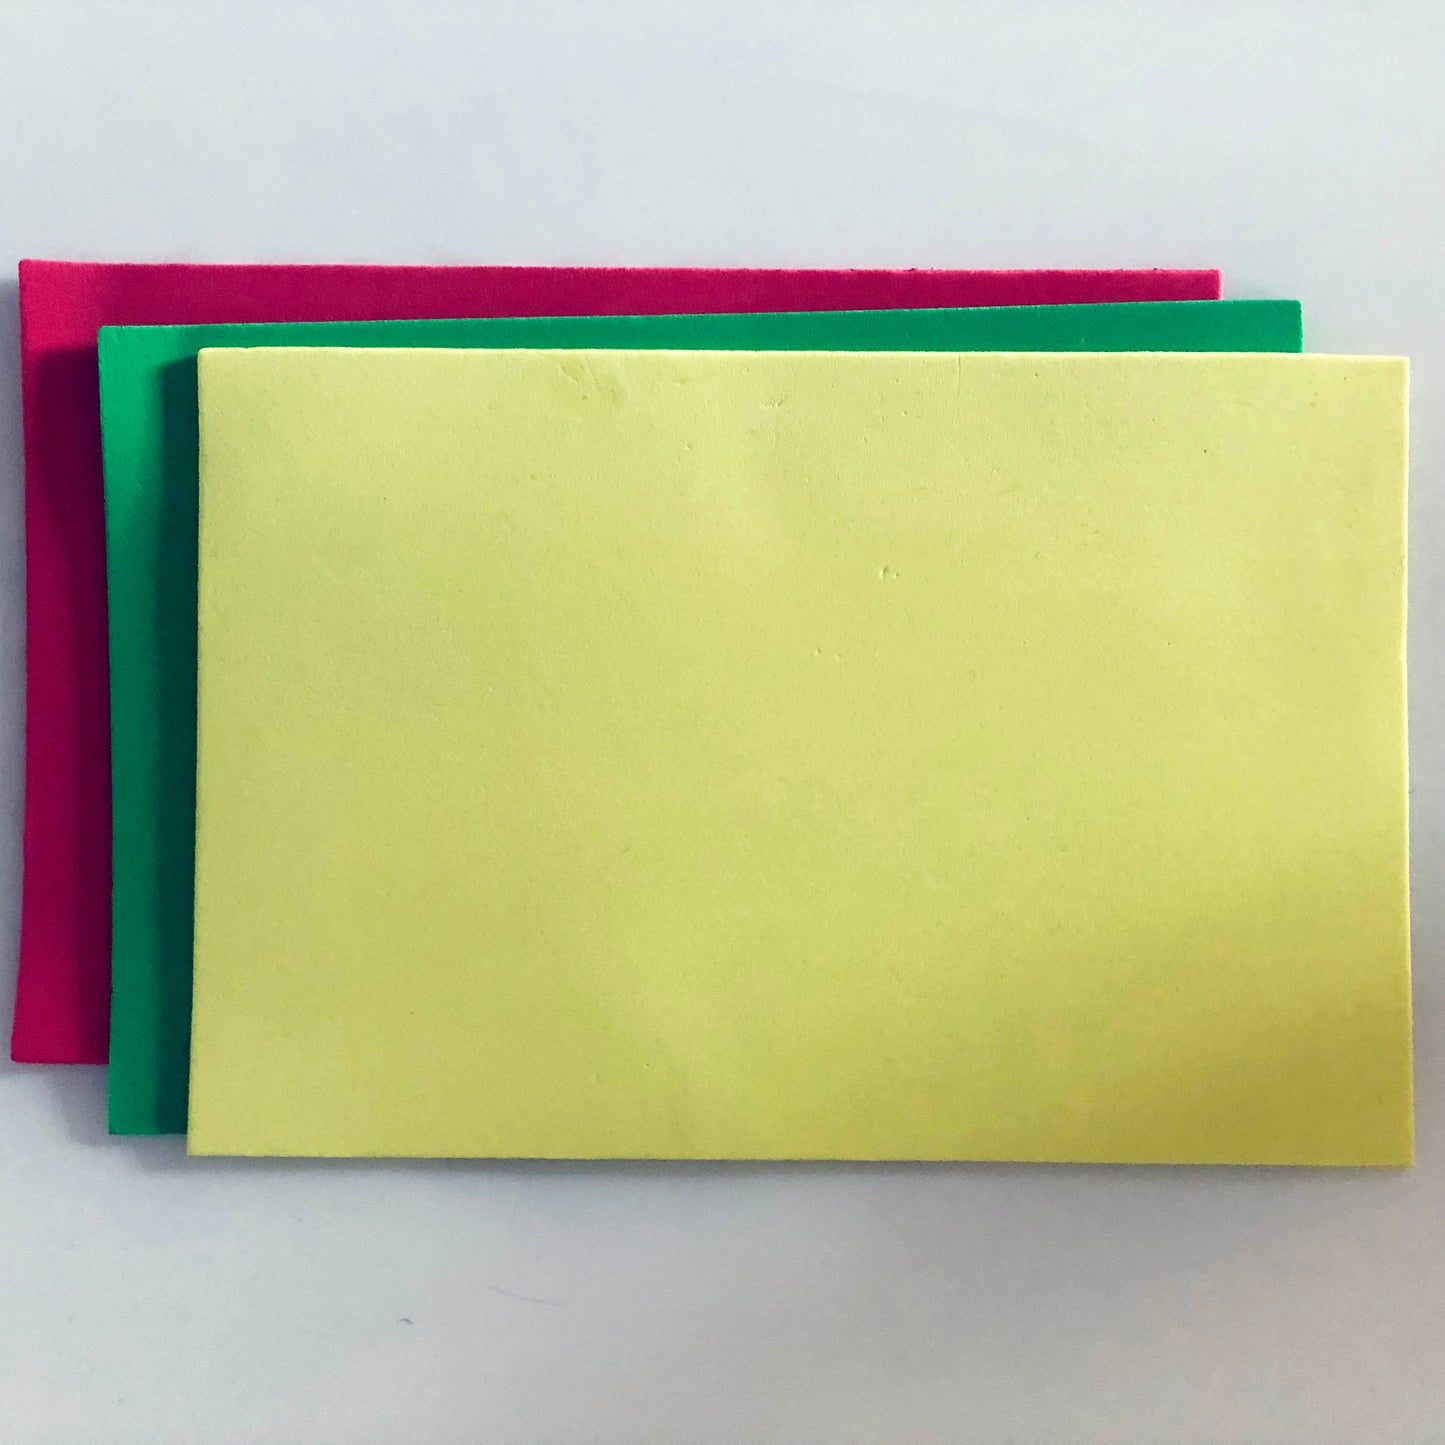 Three sheets of 1 mm foam: red, green and yellow